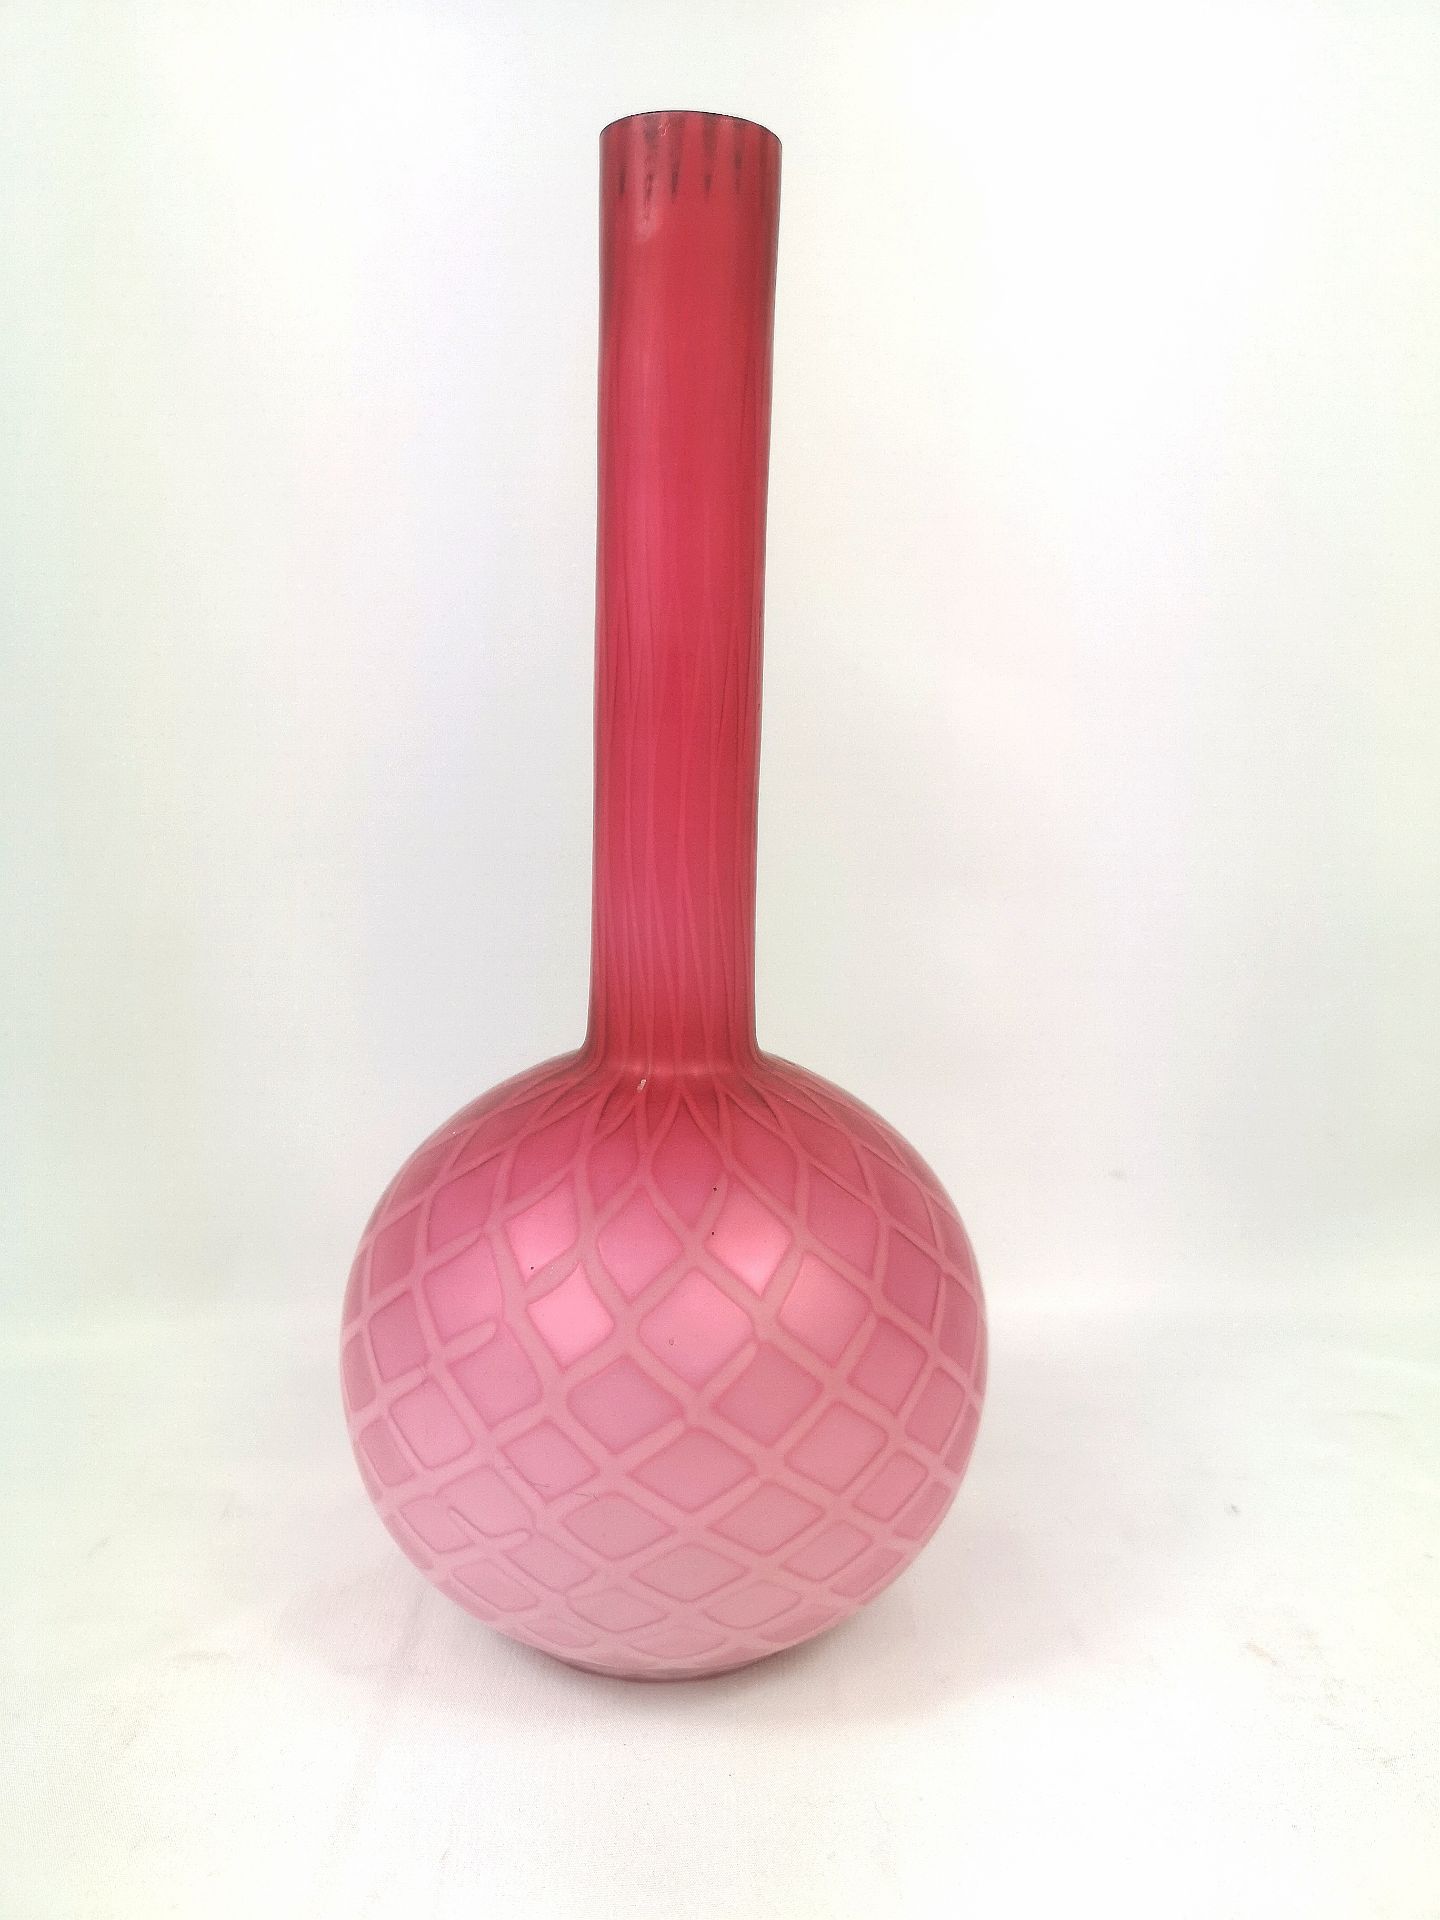 Layered cranberry over opalescent glass vase - Image 6 of 6